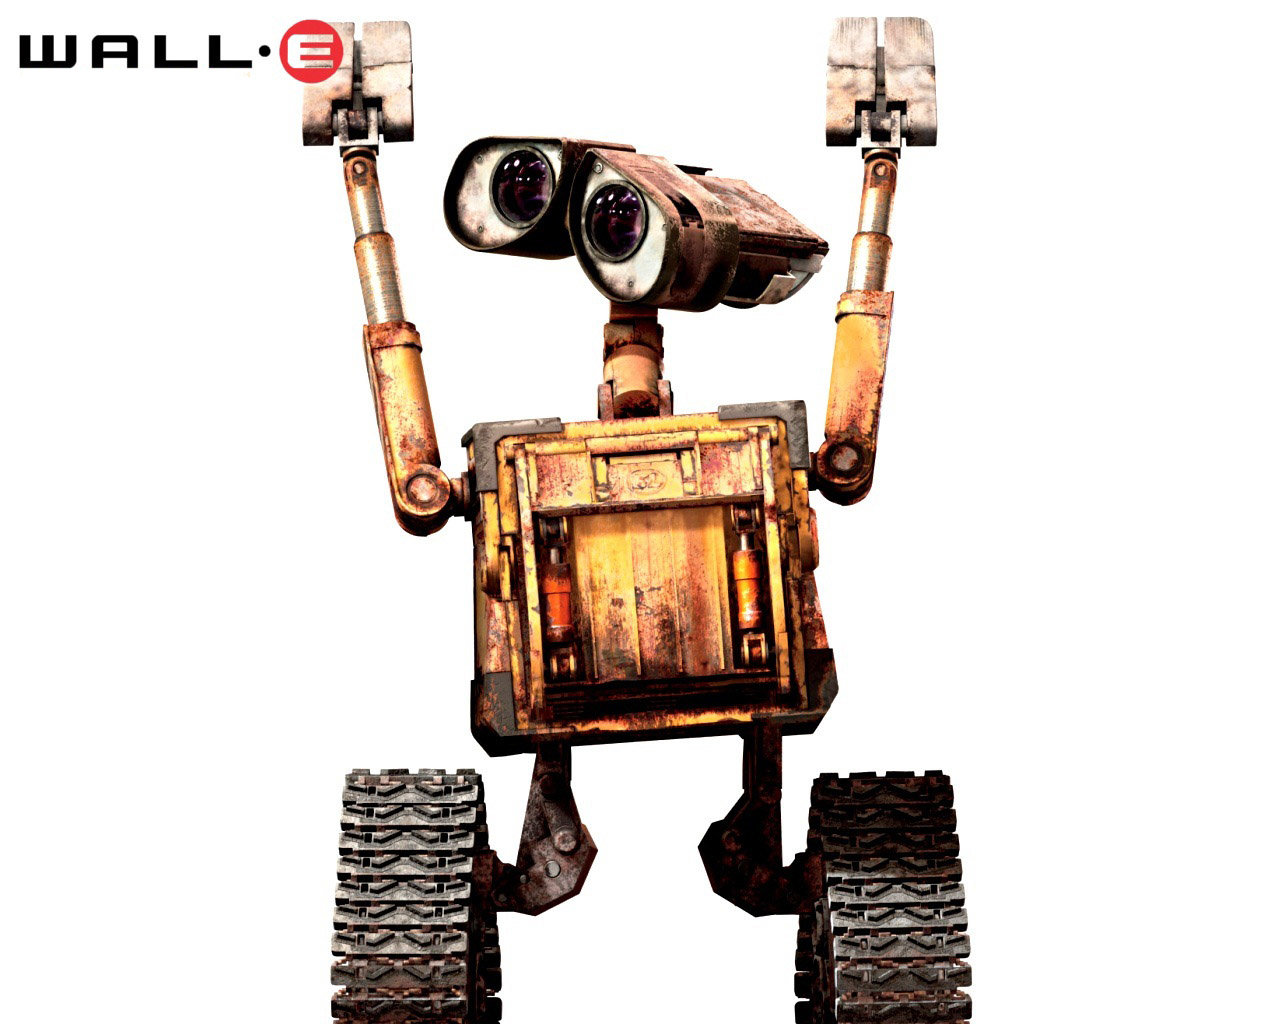 Free Wall.E high quality wallpaper ID:25938 for hd 1280x1024 computer